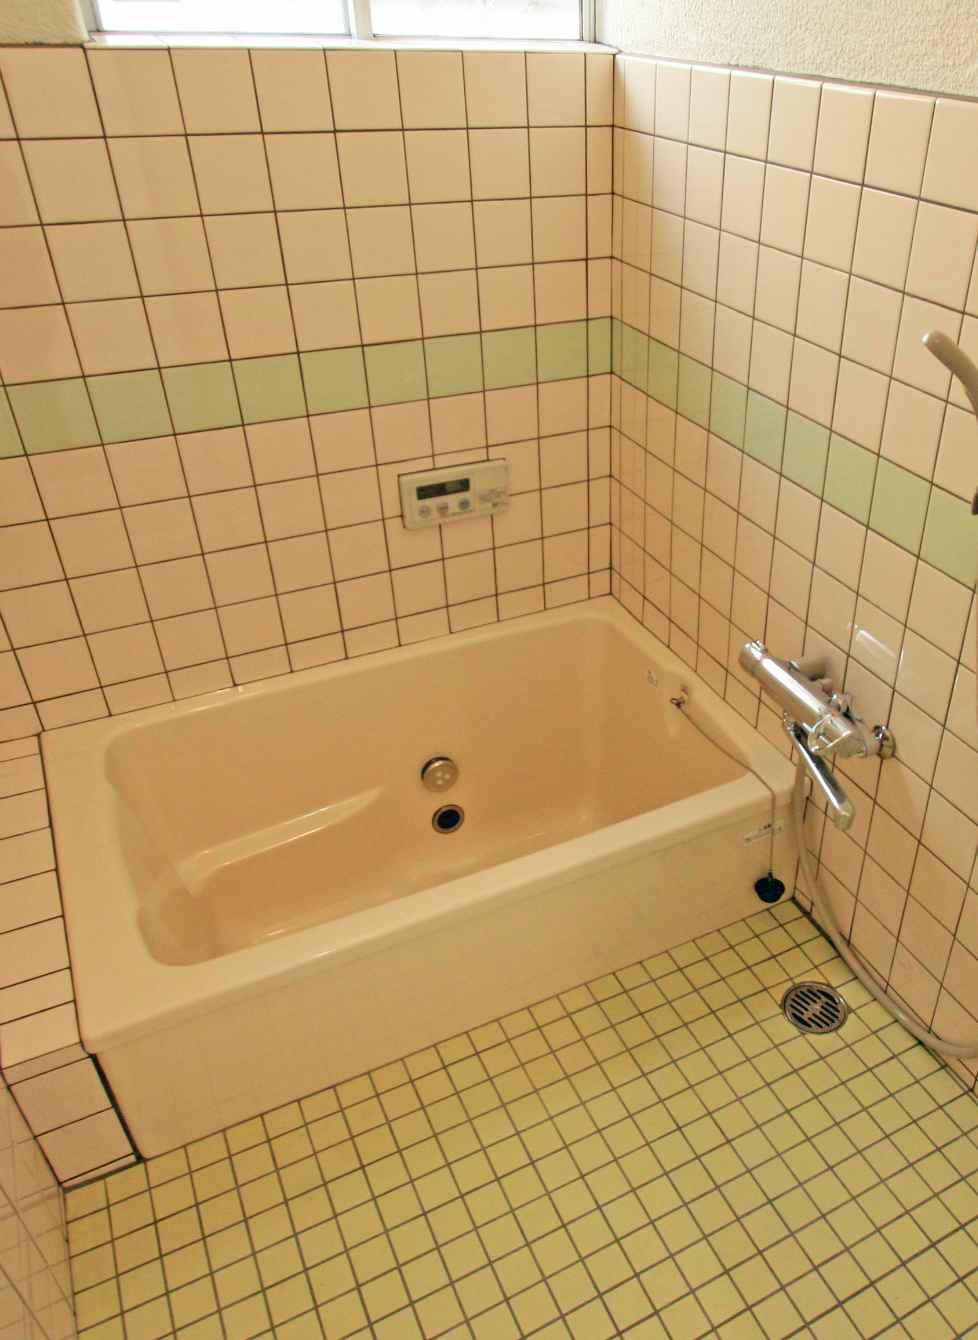 Bathroom. You can relax because the bathtub is also wide